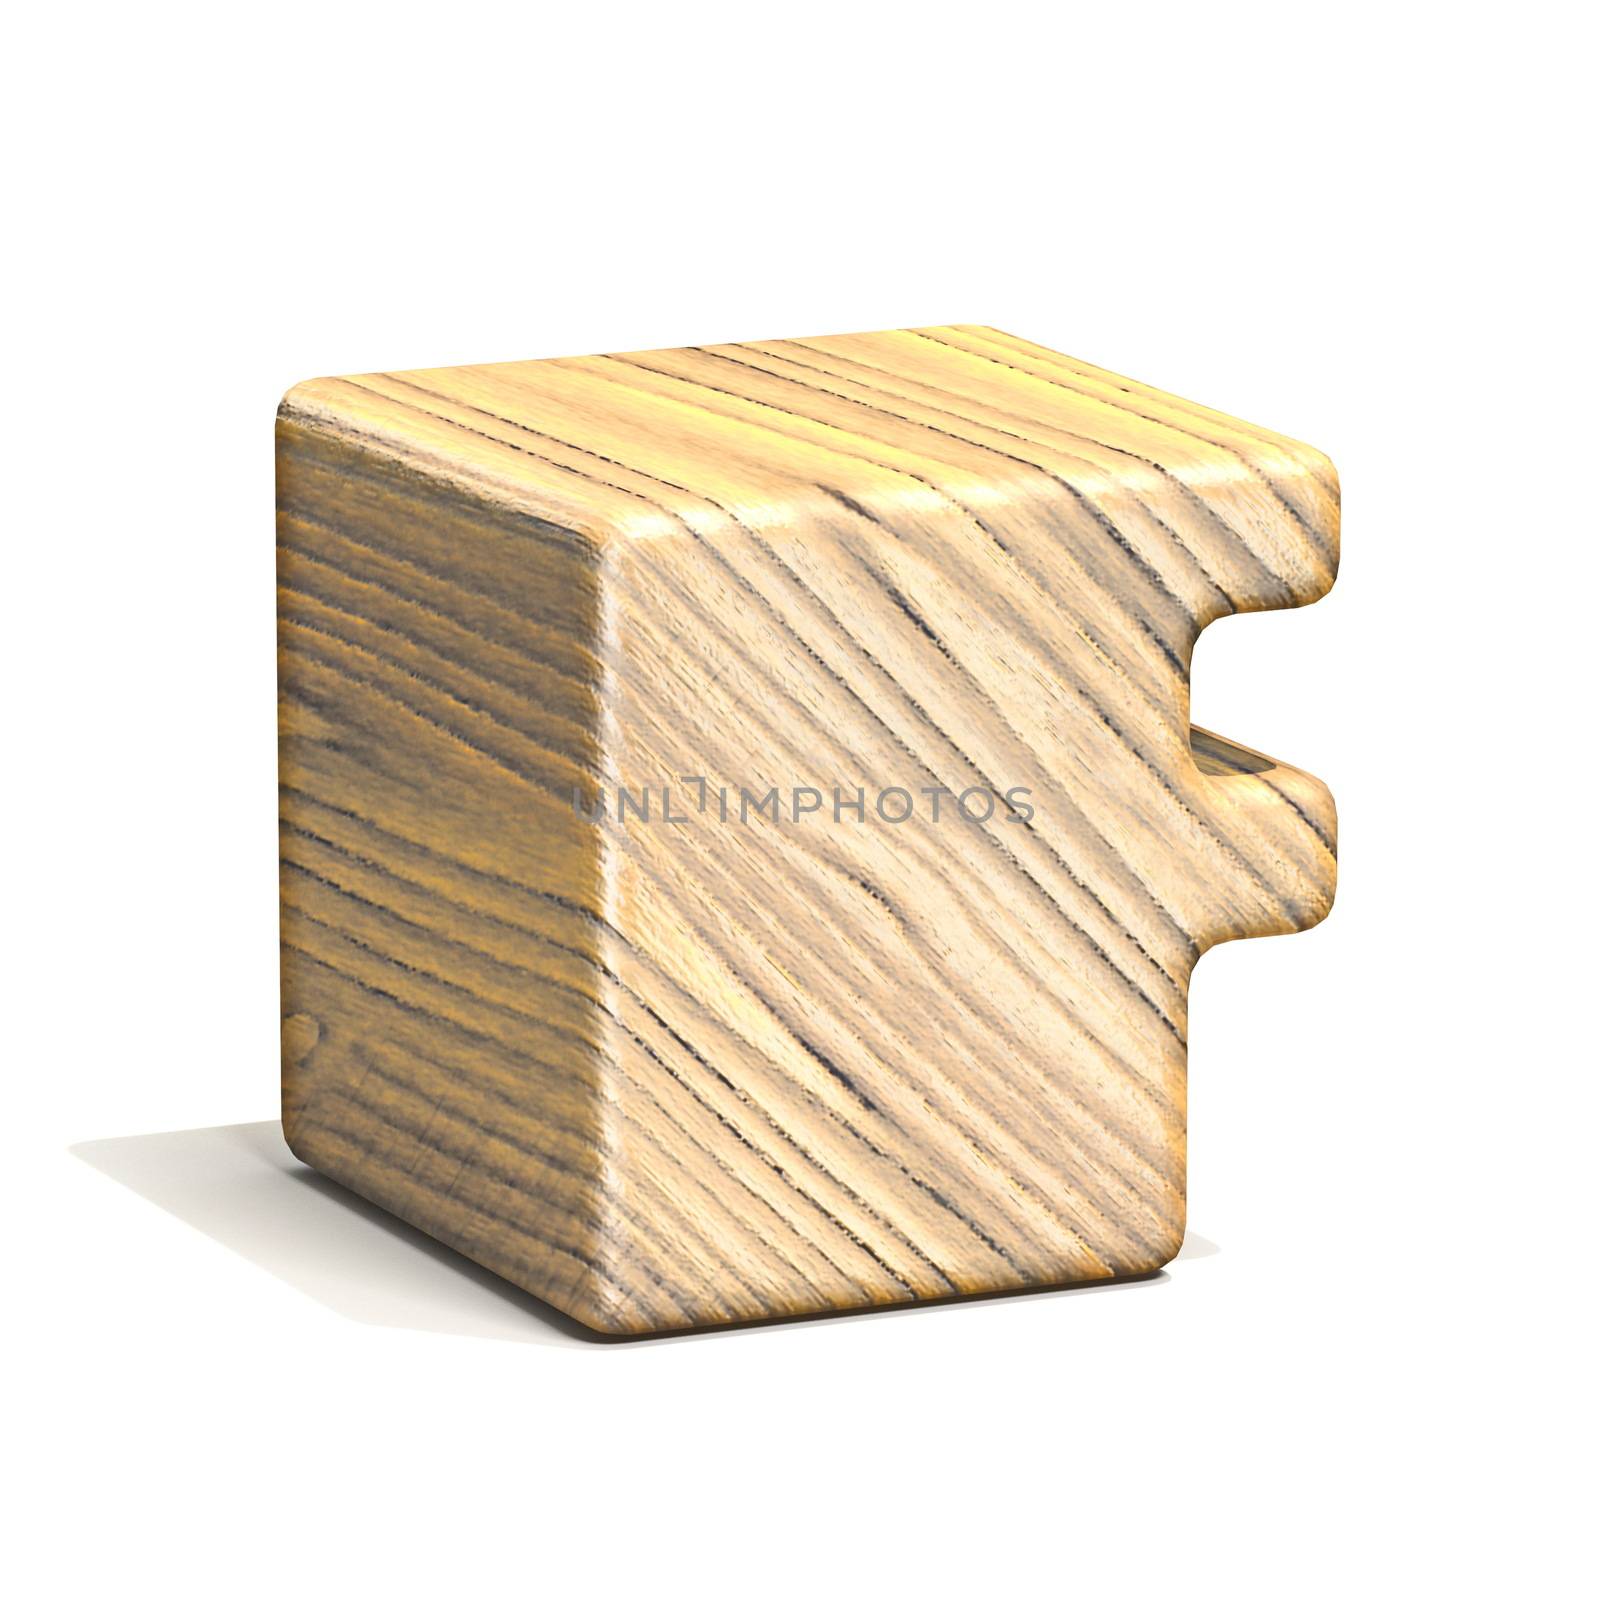 Solid wooden cube font Letter F 3D by djmilic